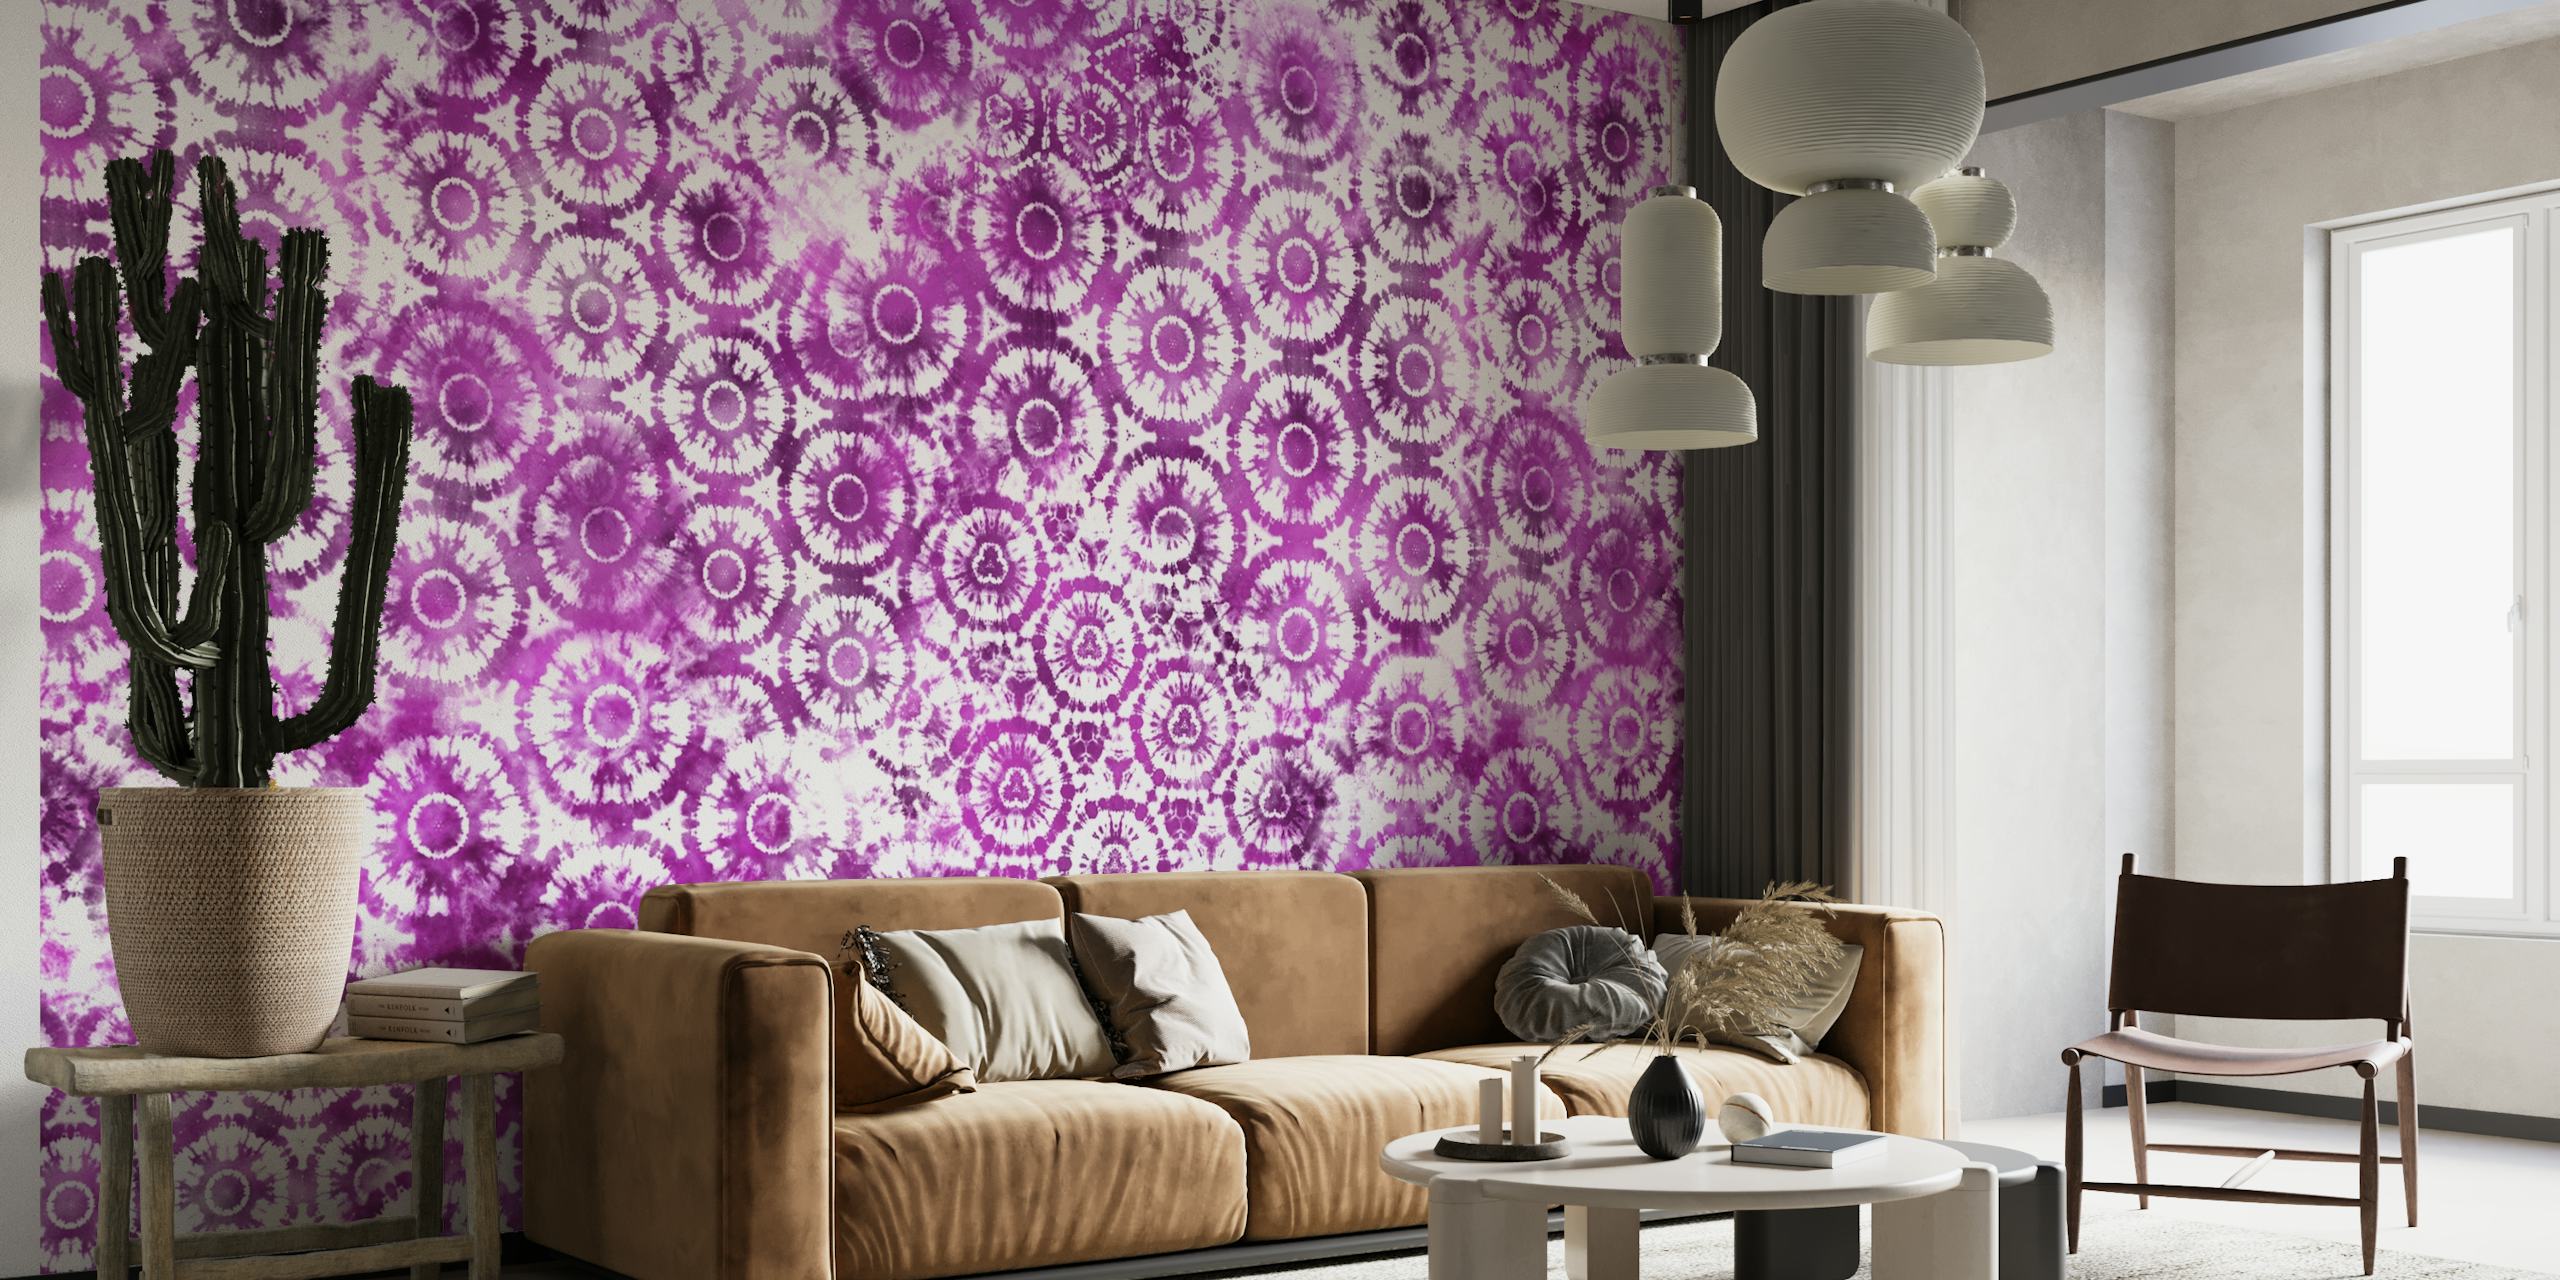 Shibori Tie Dye Pink Retro wall mural with a blend of vibrant and soft pink patterns